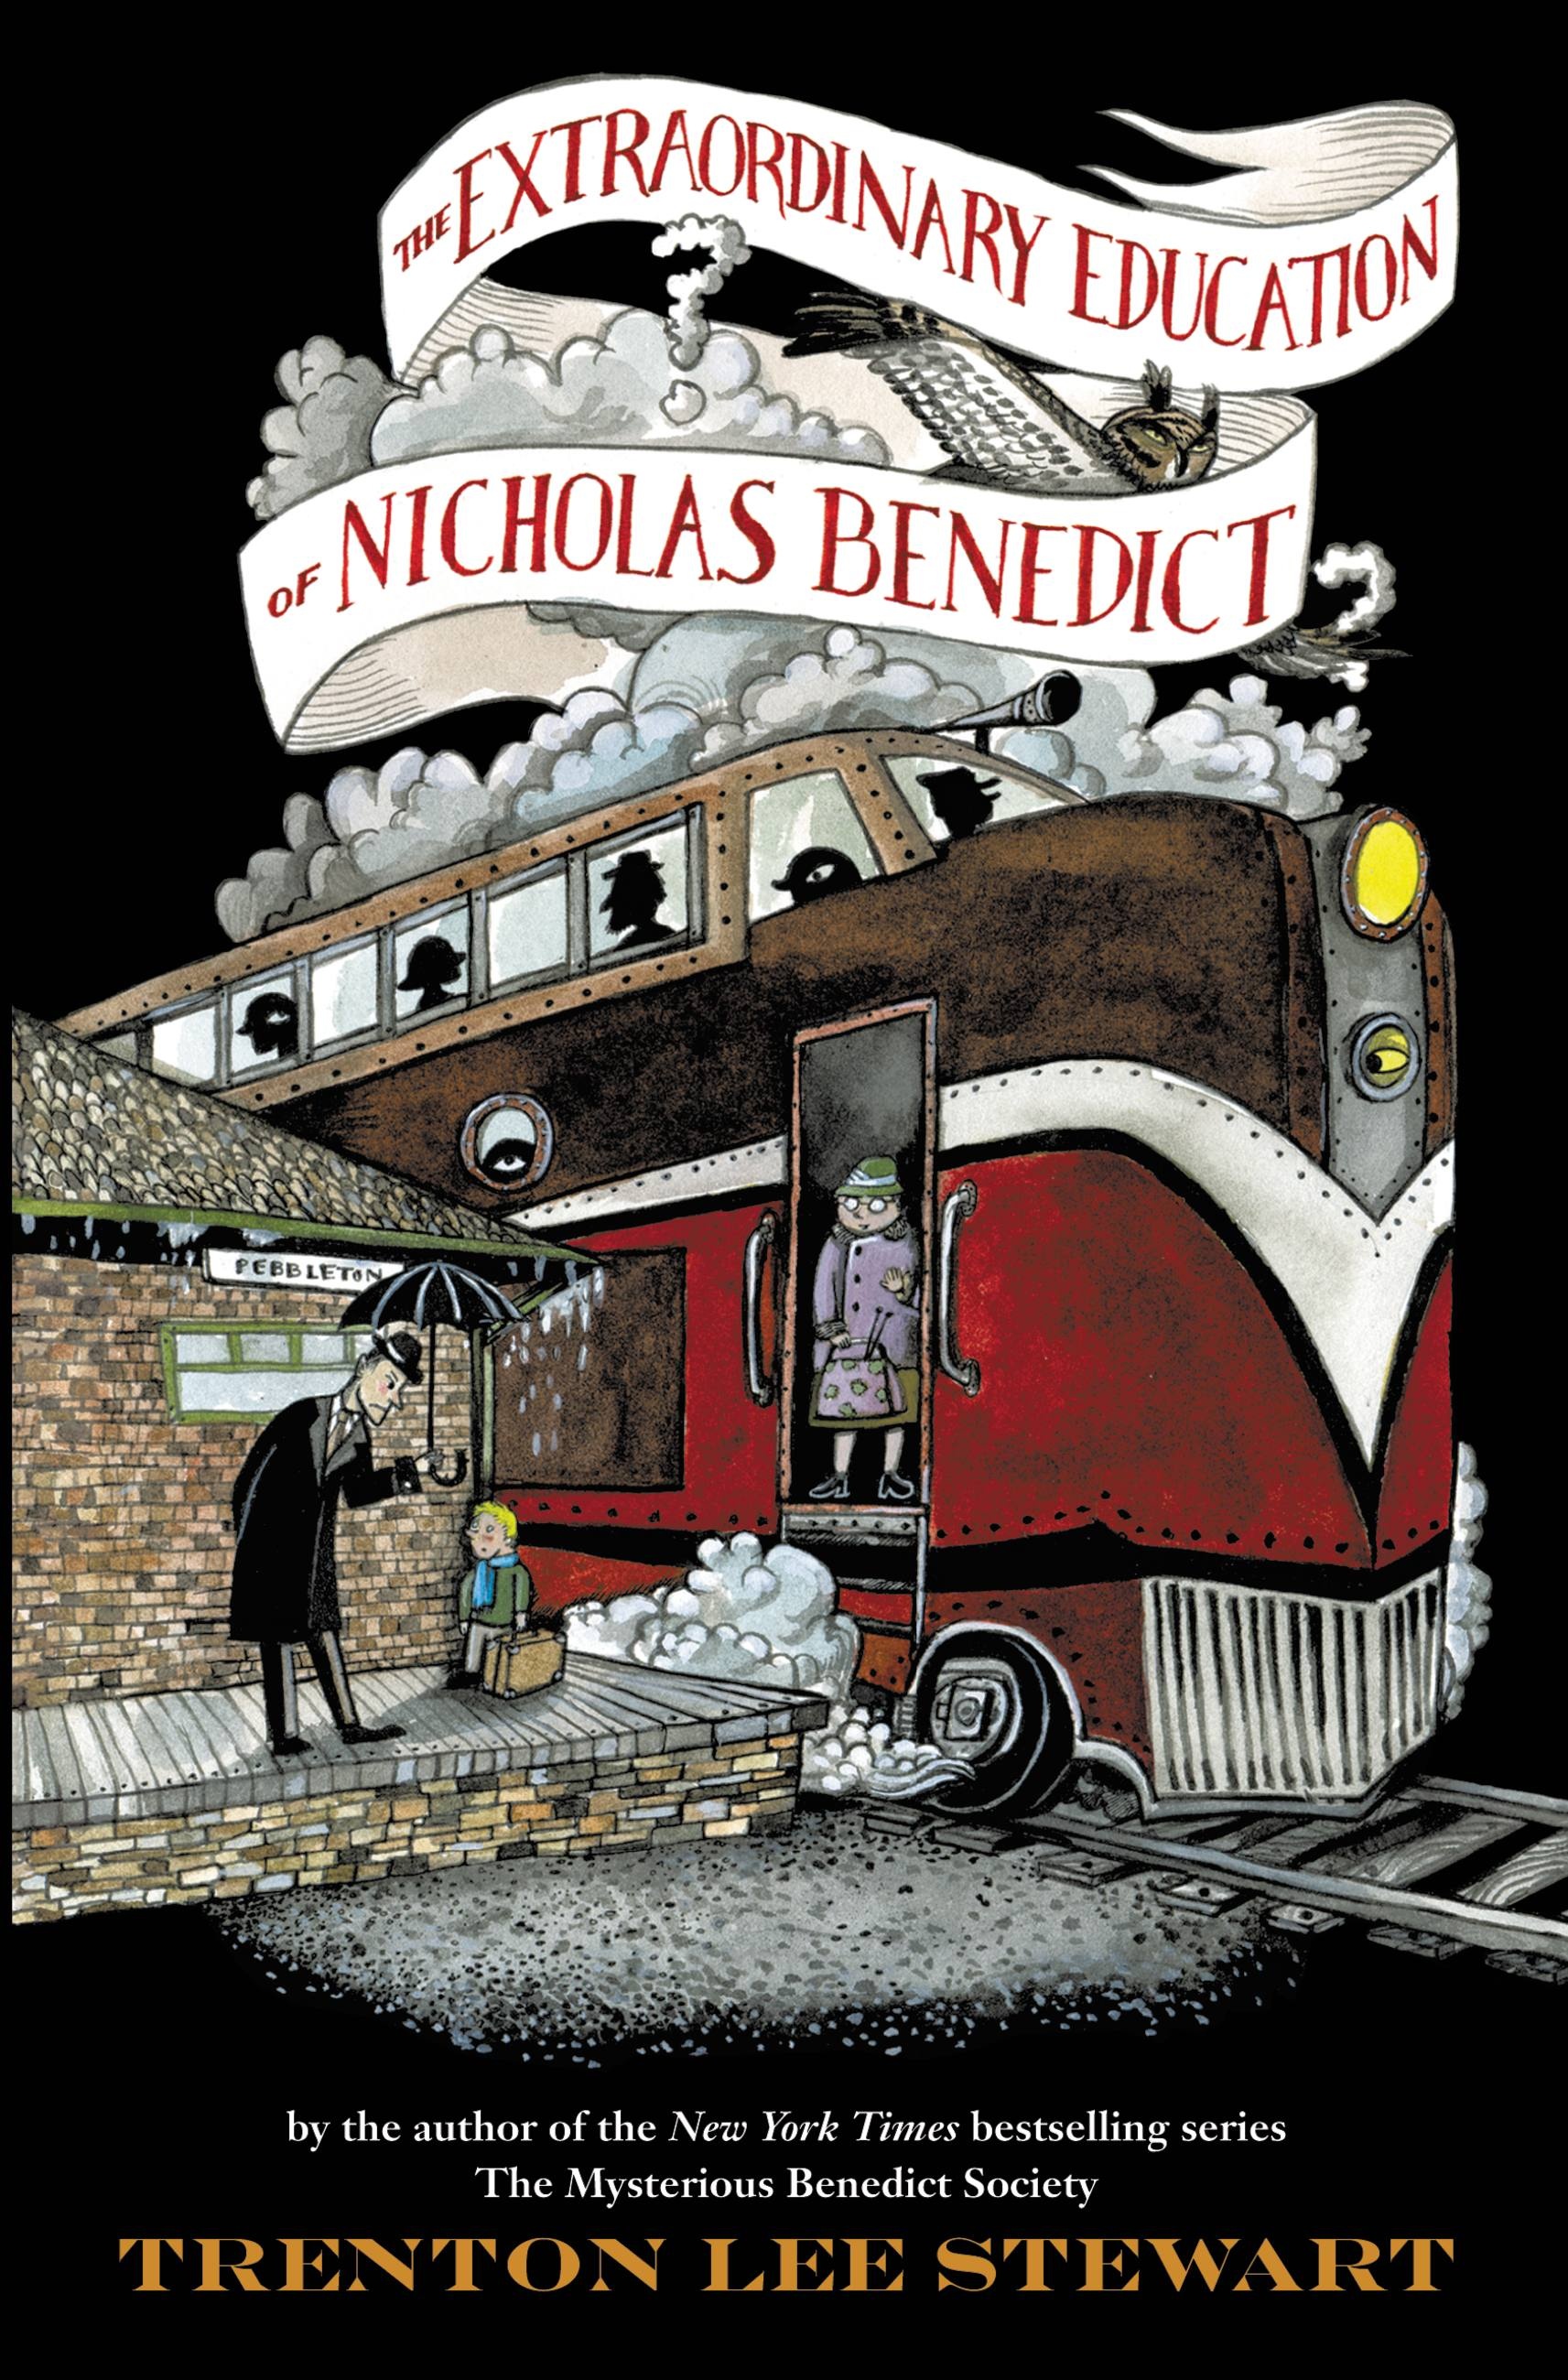 The Extraordinary Education of Nicholas Benedict by Trenton Lee Stewart |  Little, Brown Books for Young Readers